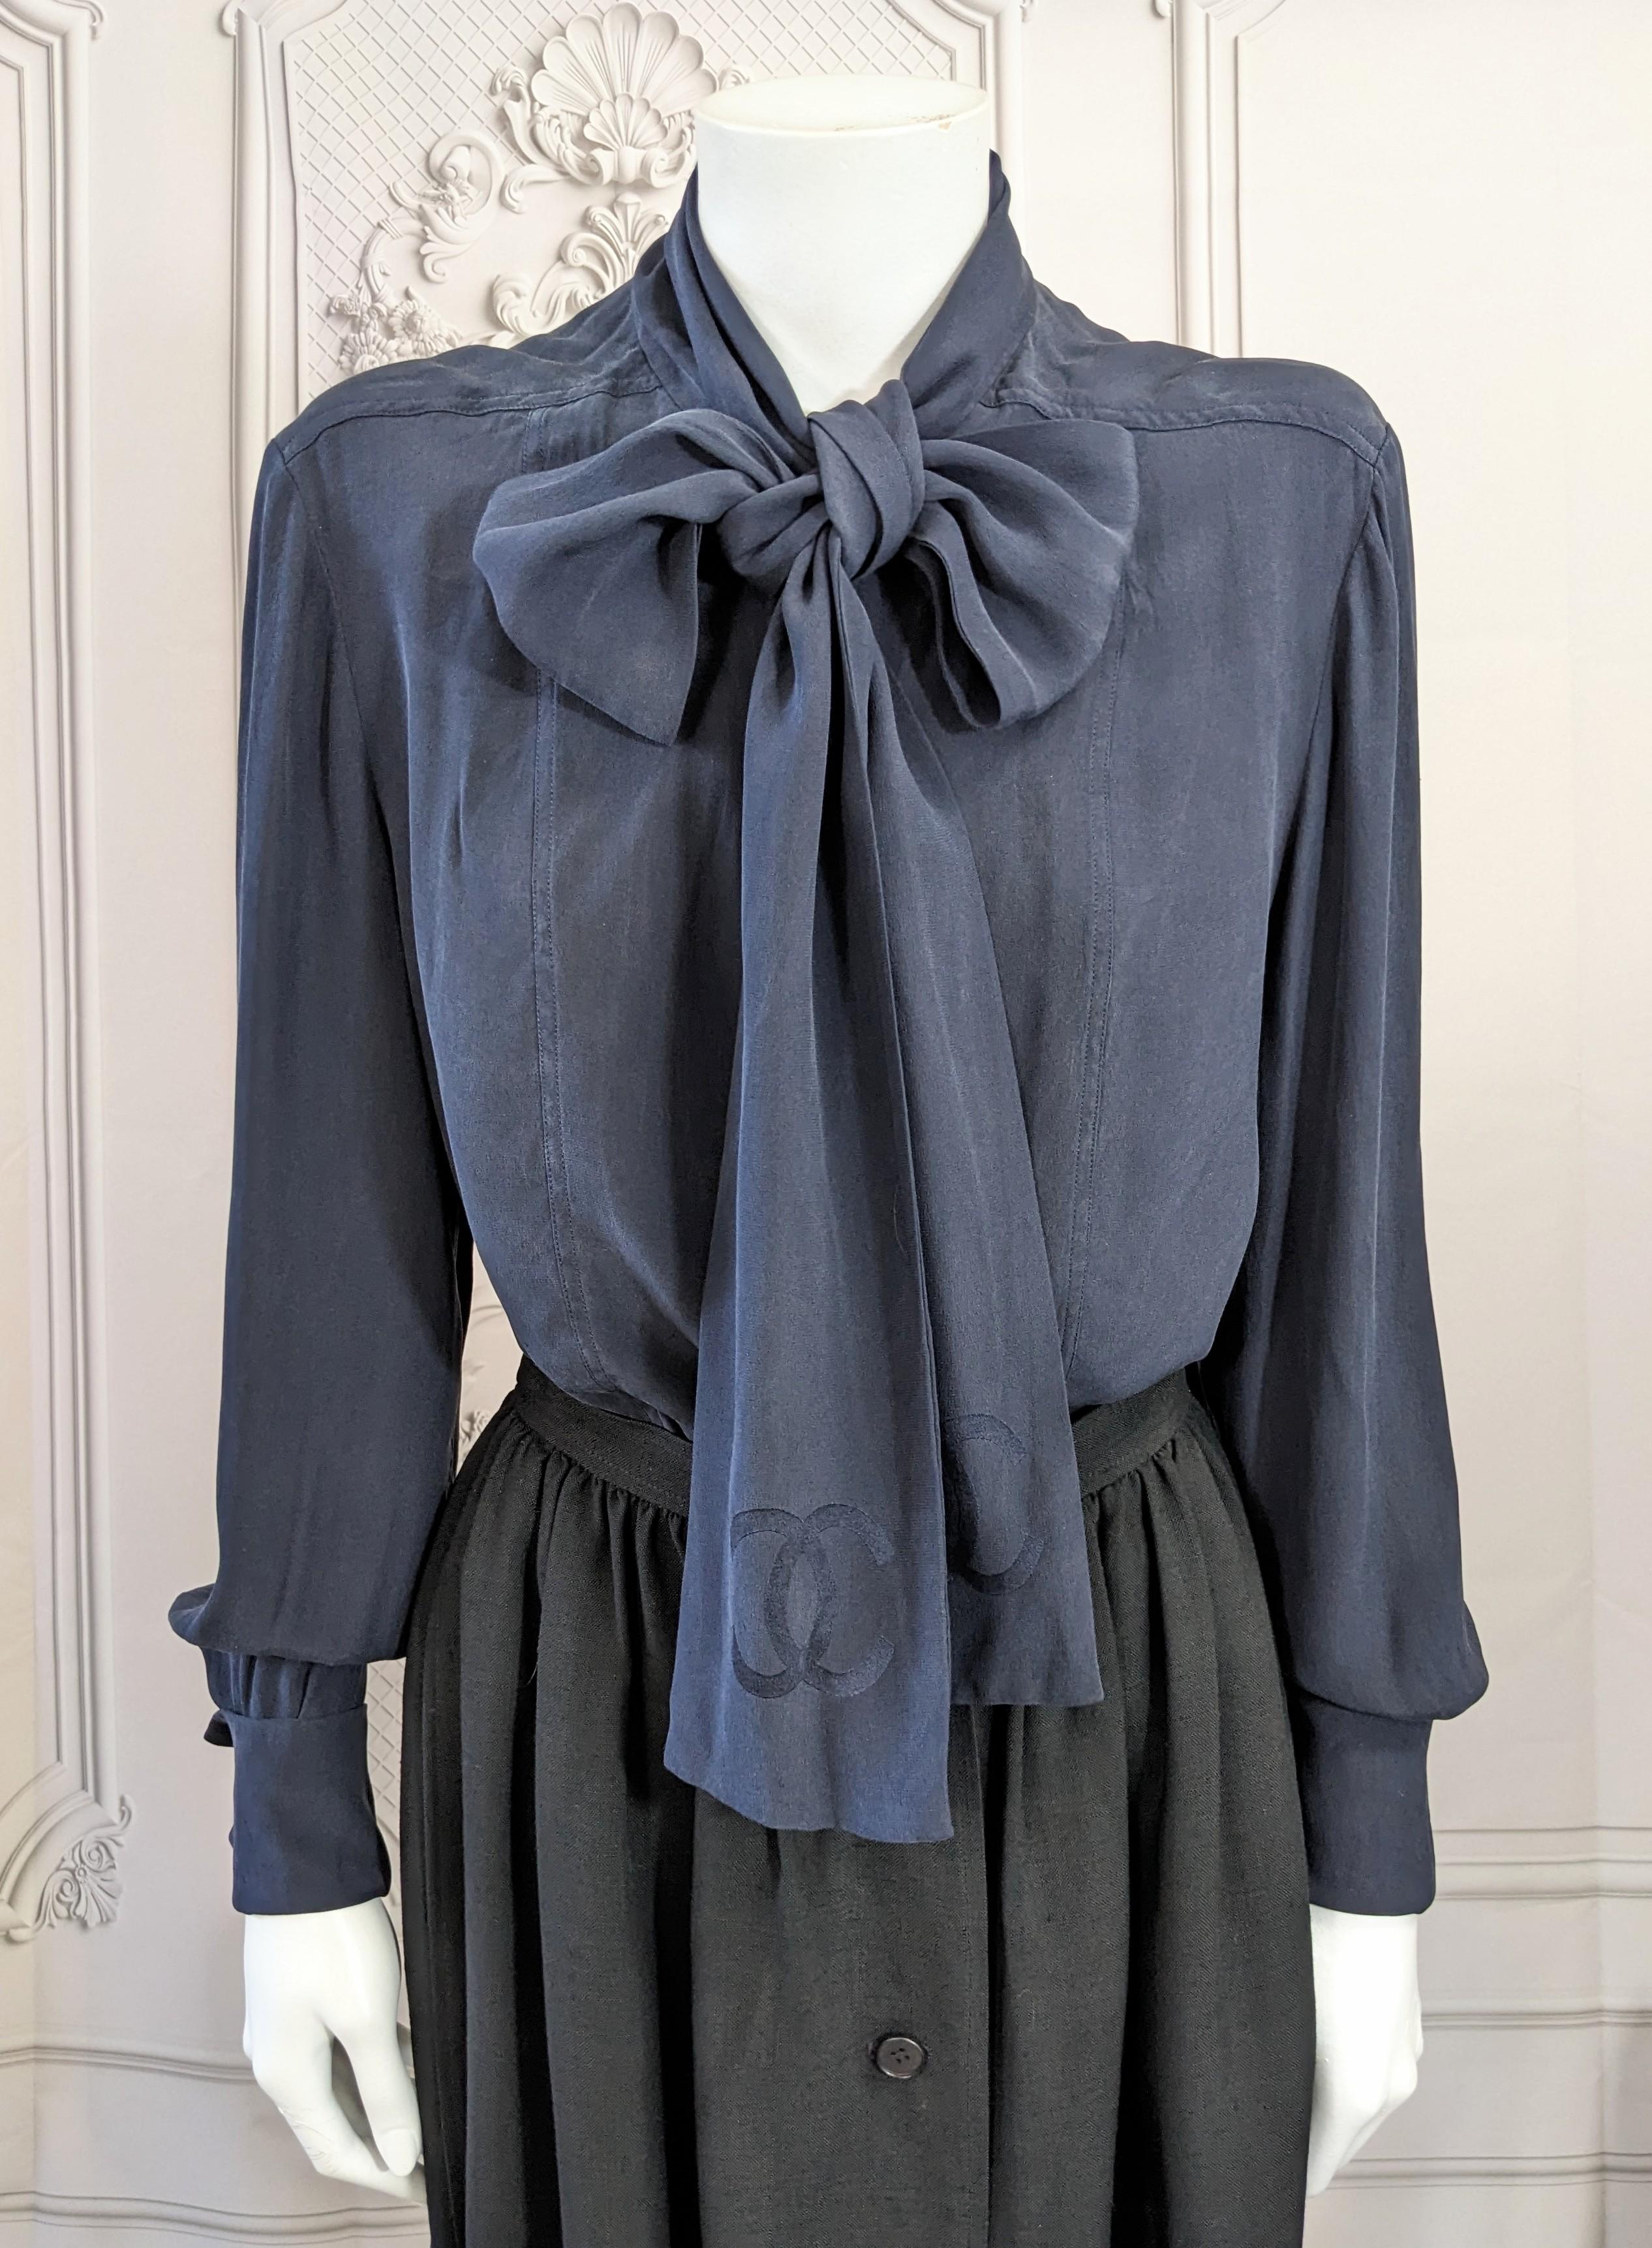 Classic Chanel Navy Washed Silk Crepe Satin Logo Pussy Bow Blouse from the 1980's. Cool, soft fabric which is sand washed silk crepe with satin inside. This allows the CC logo on the silk ties to be woven into the textile. Super long scarf ties have